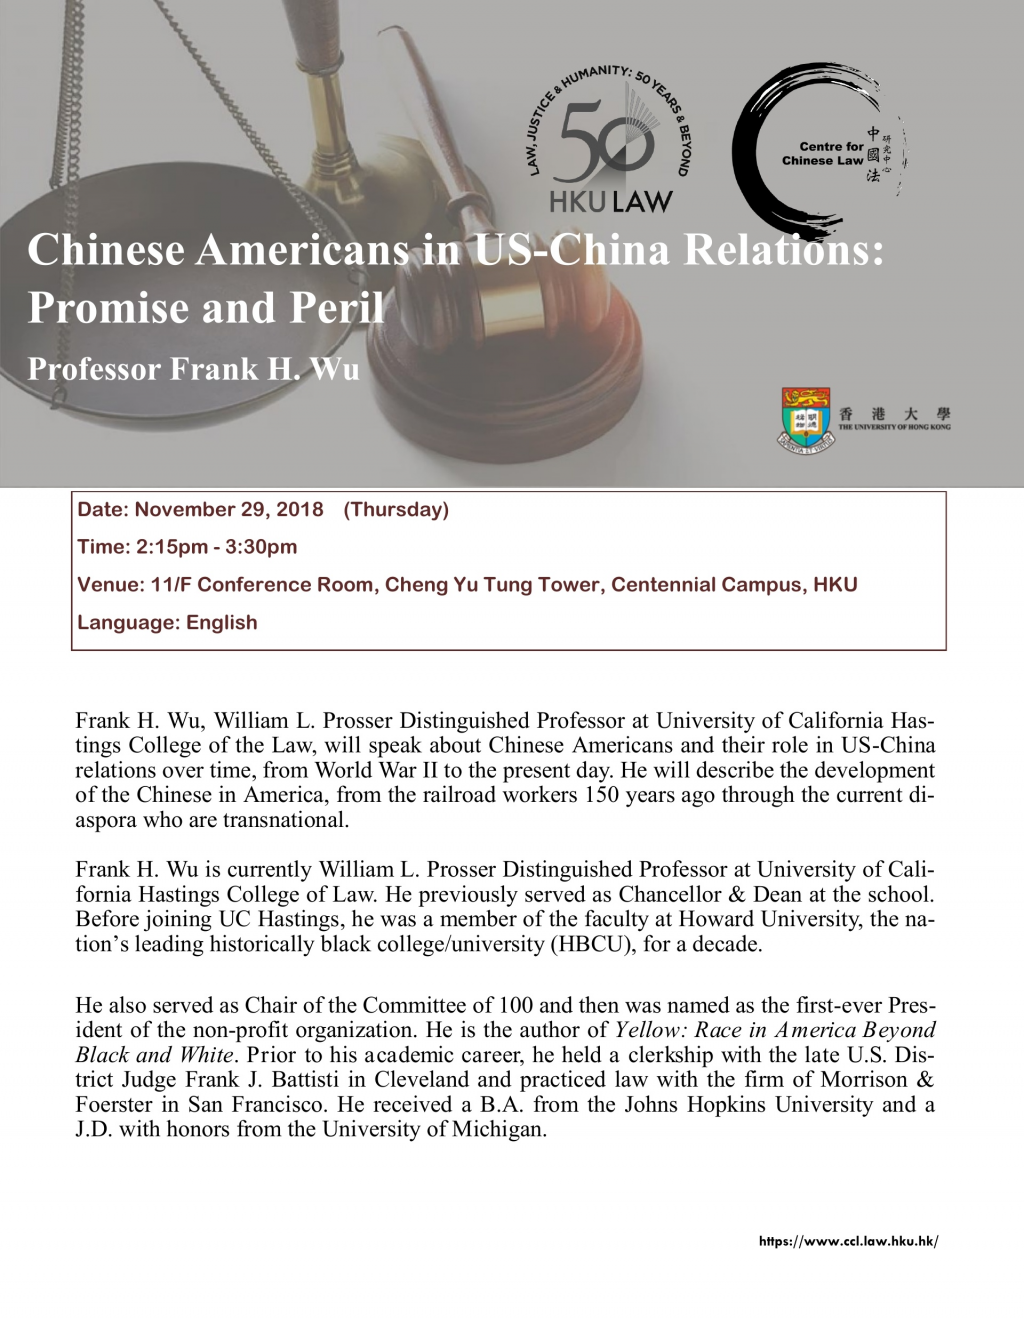 Chinese Americans in US-China Relations: Promise and Peril